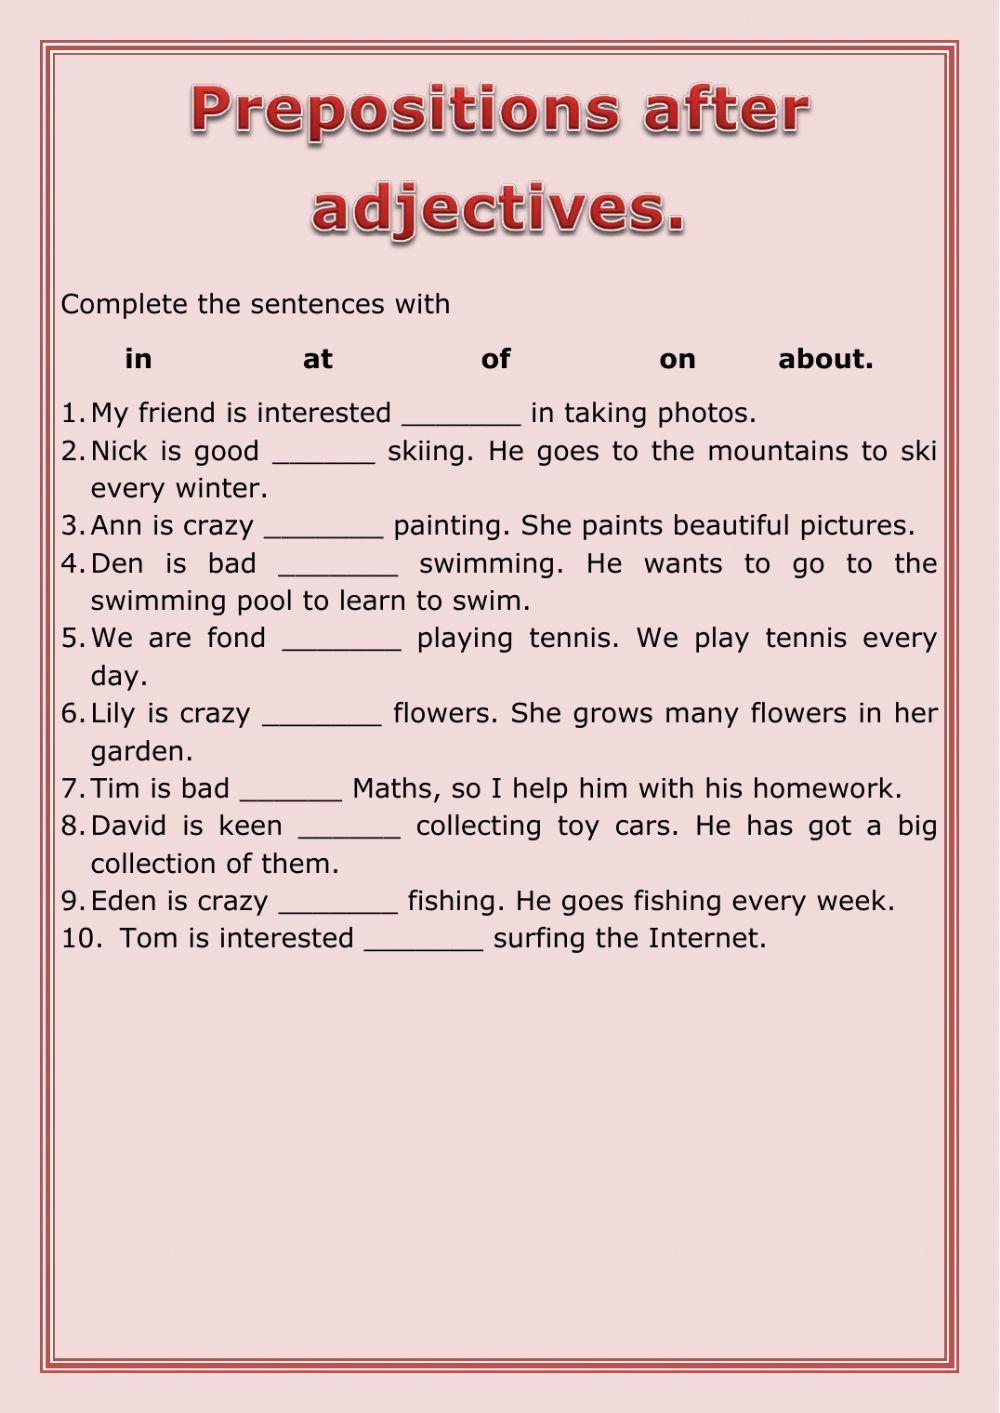 Prepositions after adjectives